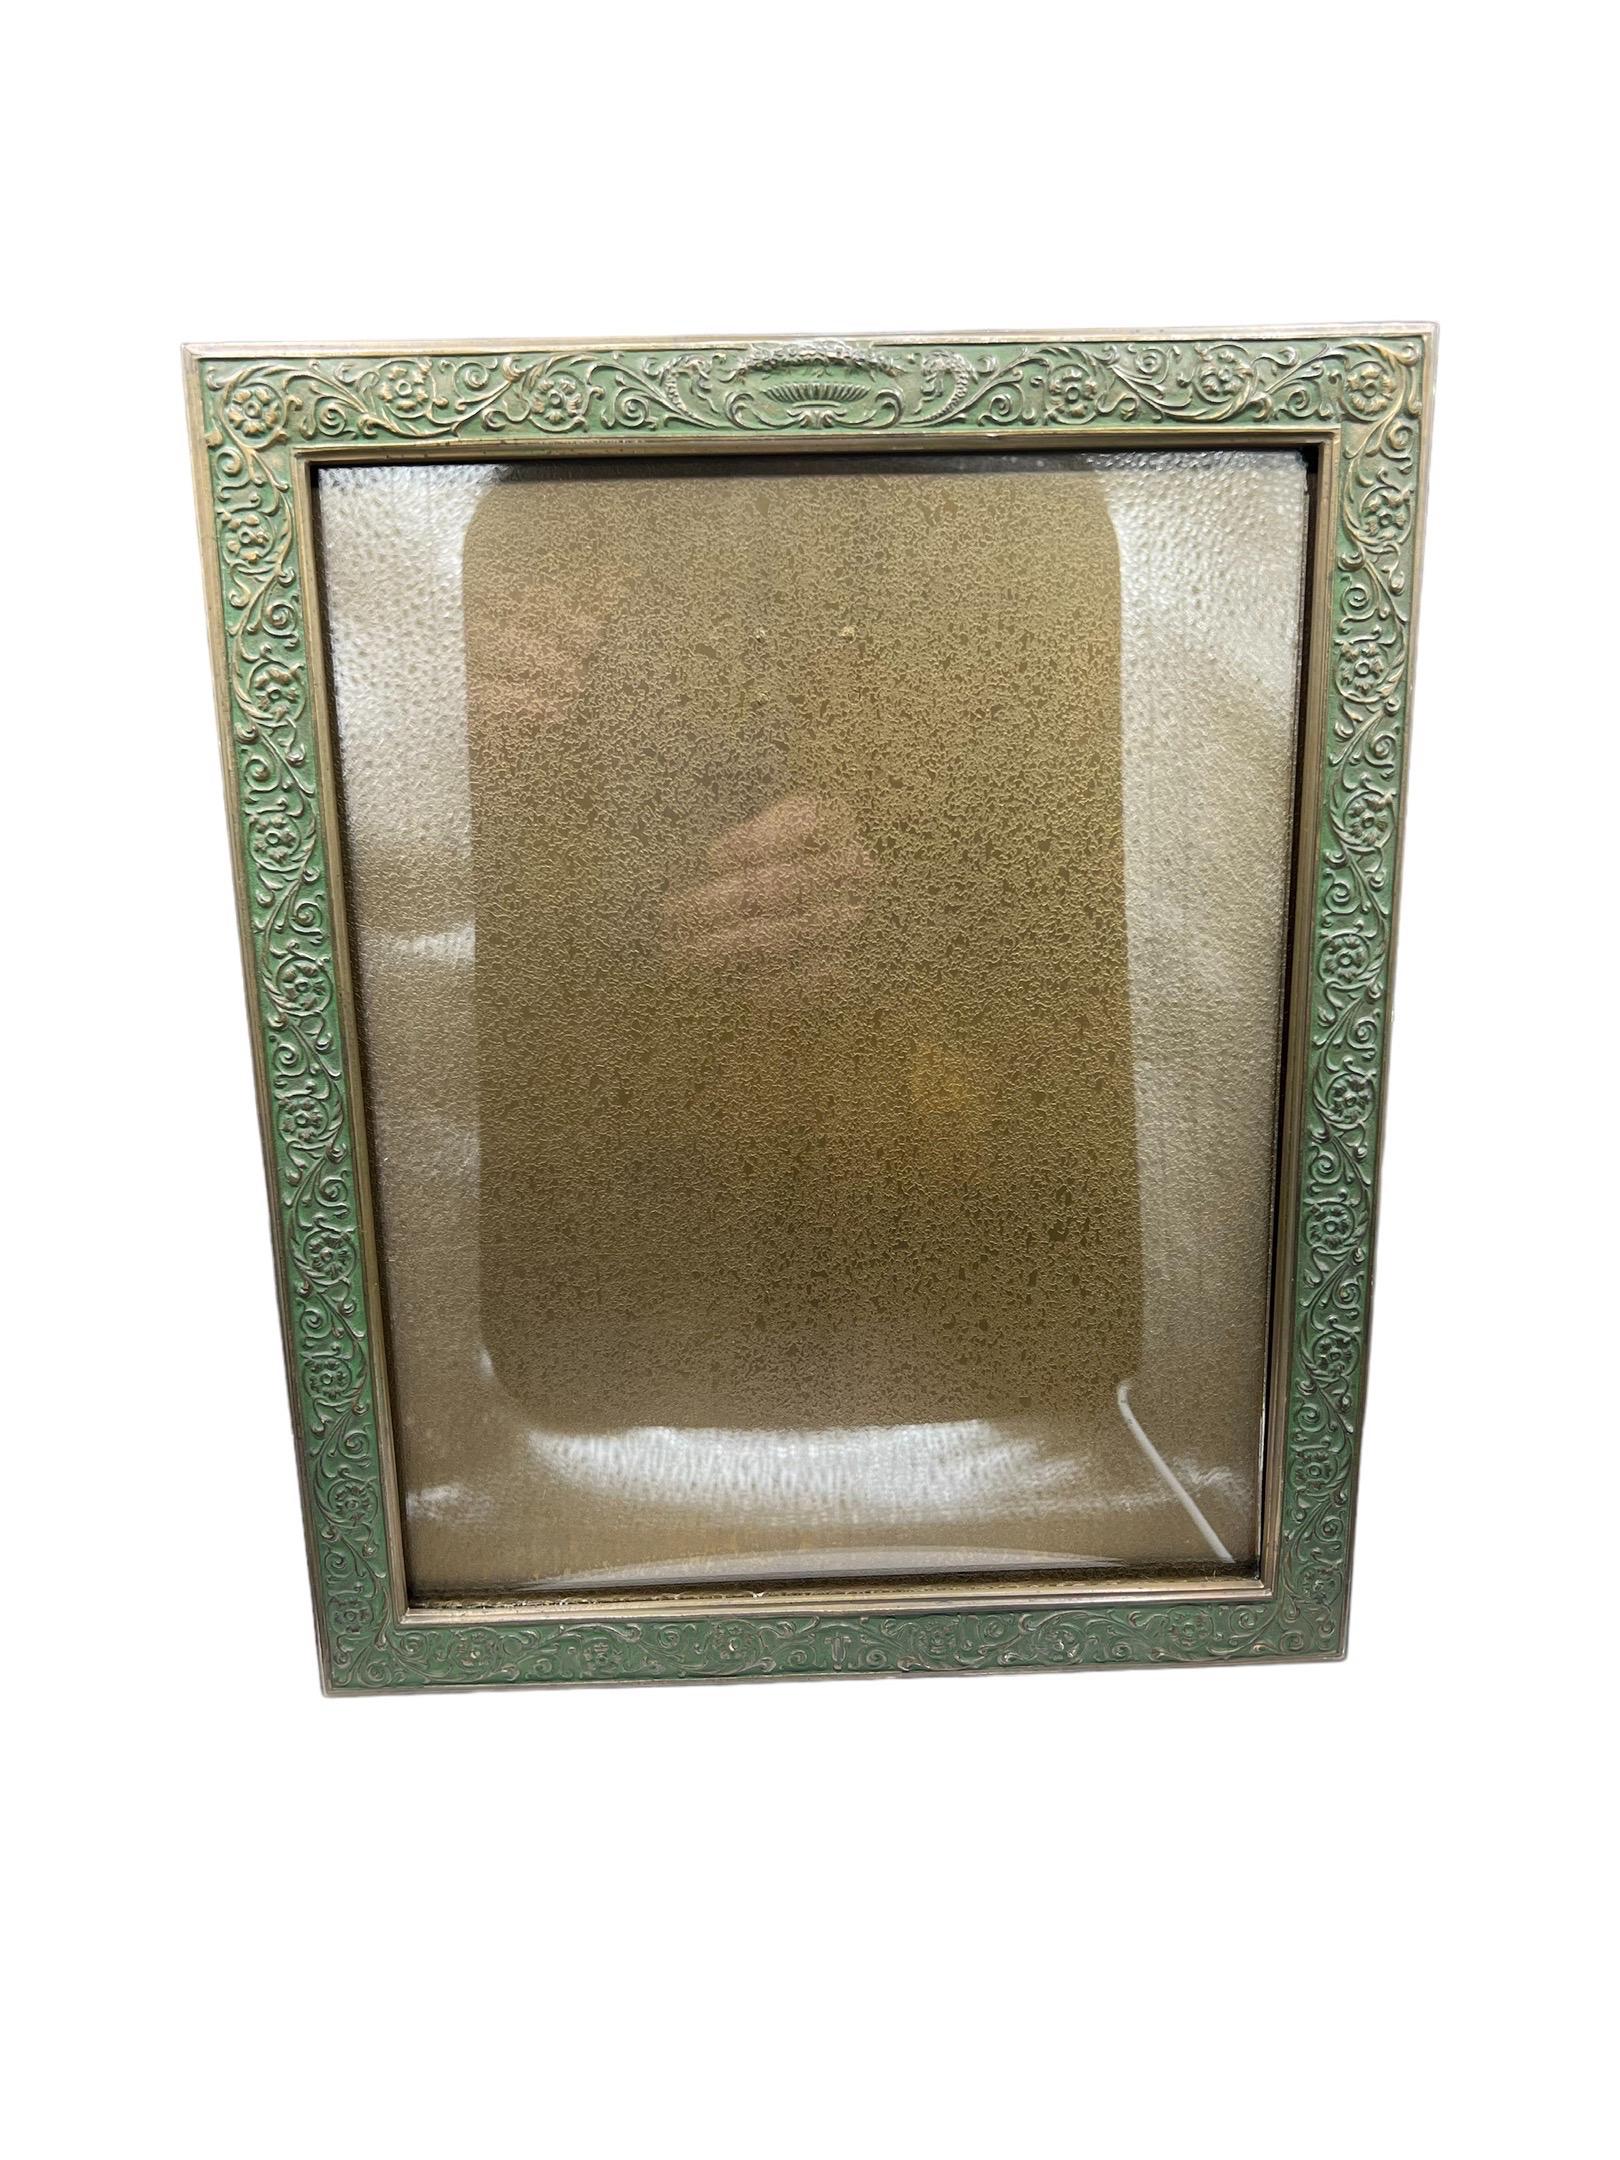 Tiffany Studios gilt-bronze picture frame, Stamped Tiffany Studios/NY/1611. For Sale 5